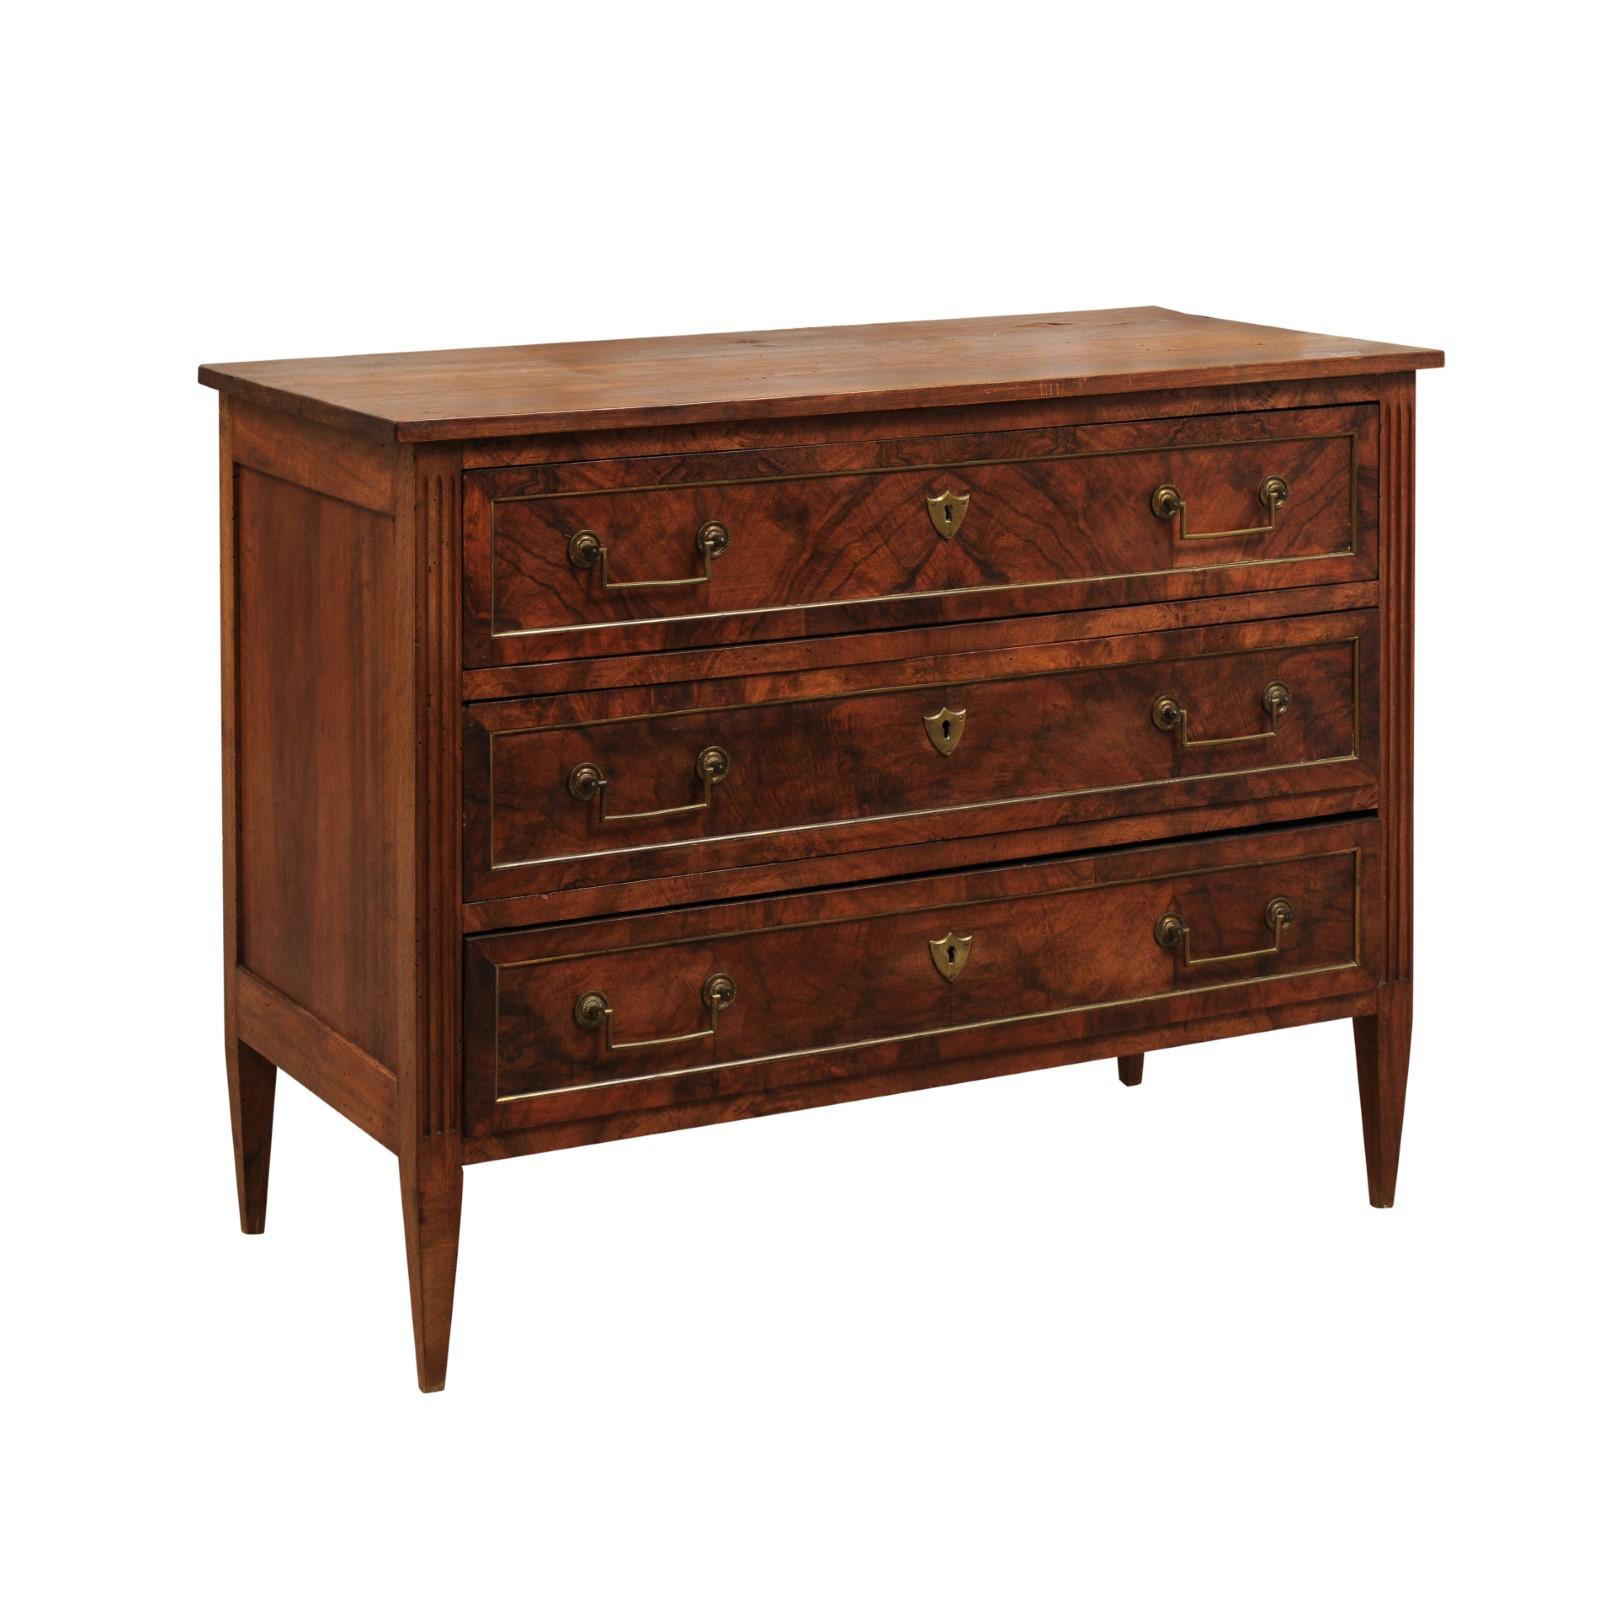 French Louis XVI Style Walnut Three-Drawer Commode with Brass Accents, 1870s